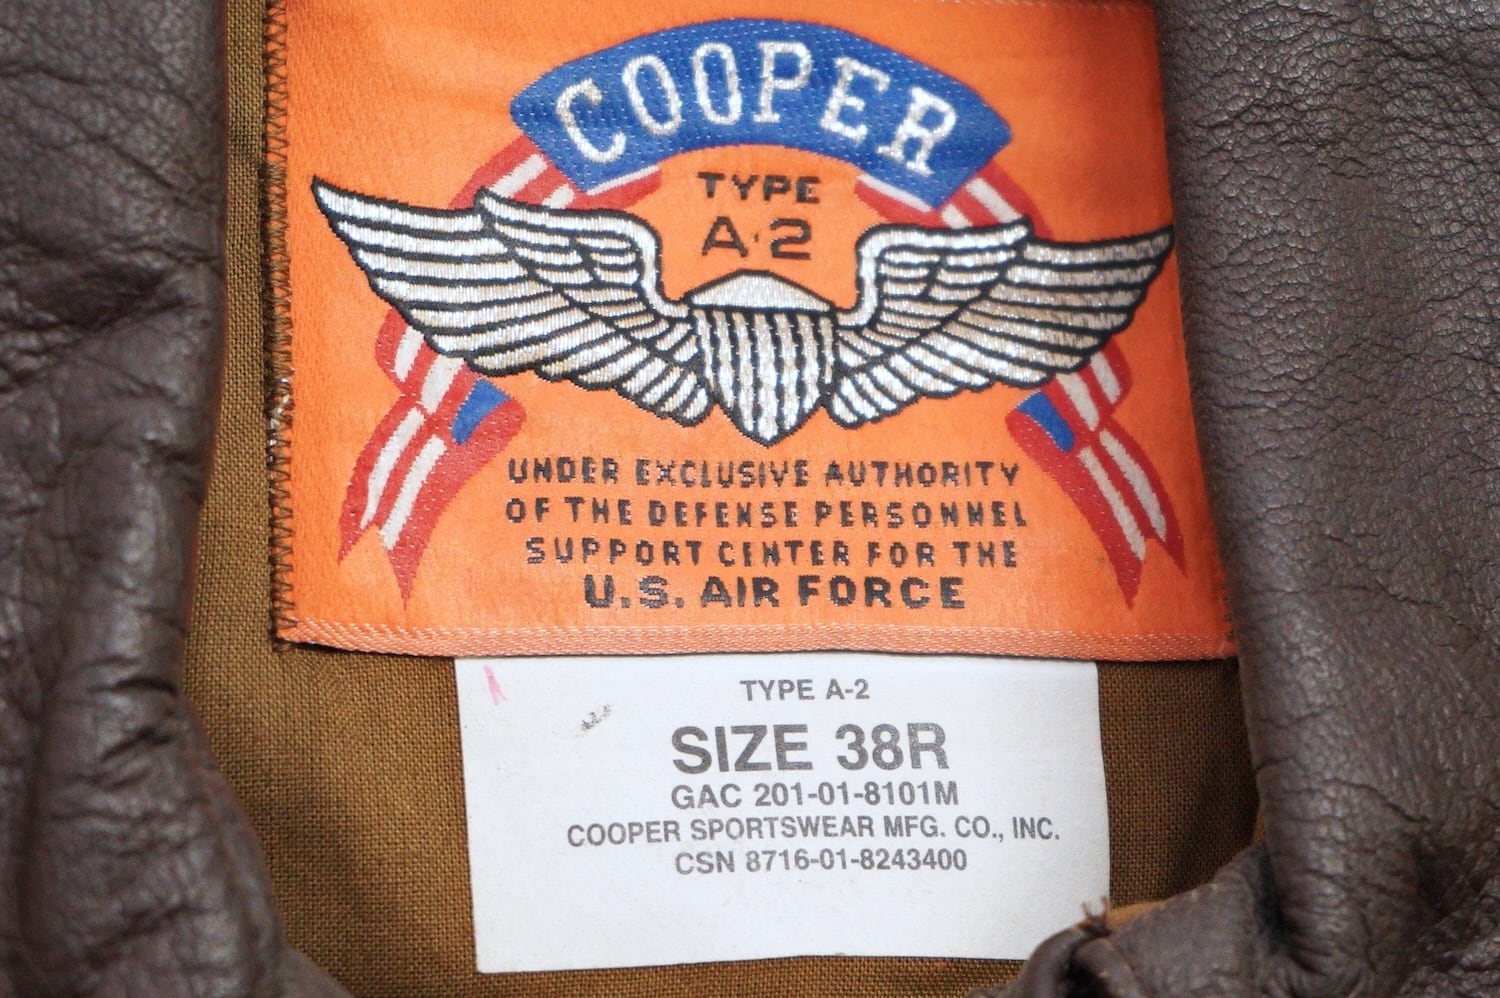 2199 COOPER TYPE A2 フライトジャケット 革ジャン U.S. AIR FORCE ...